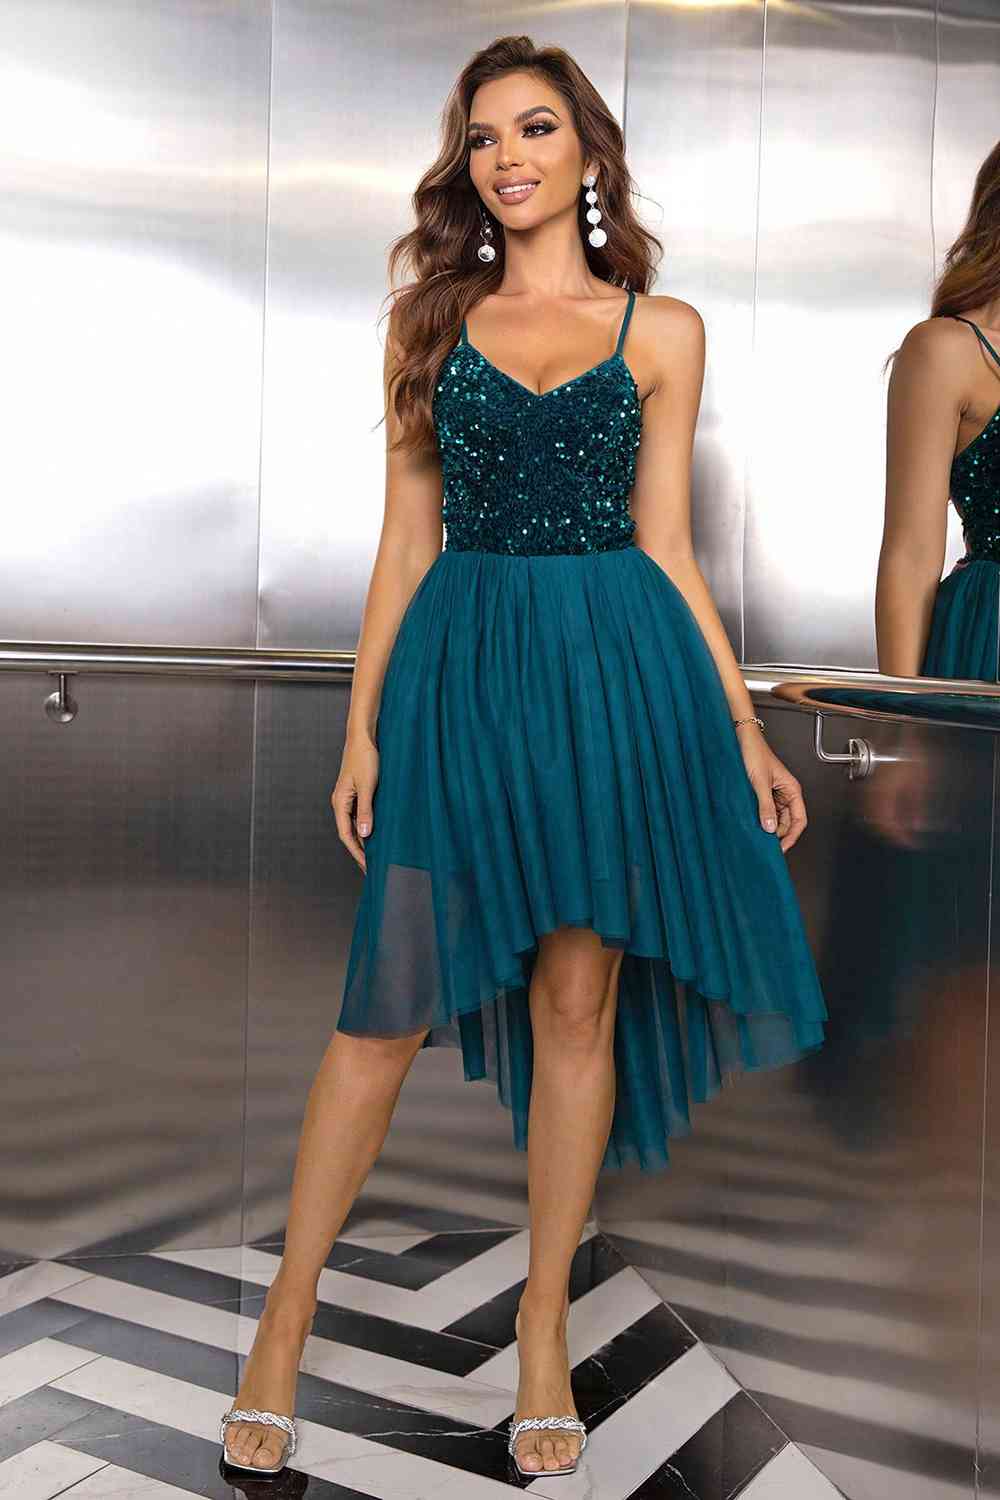 Sequin Spaghetti Strap High-Low Dress in 3 Color Choices in Size XS, S, M, or L